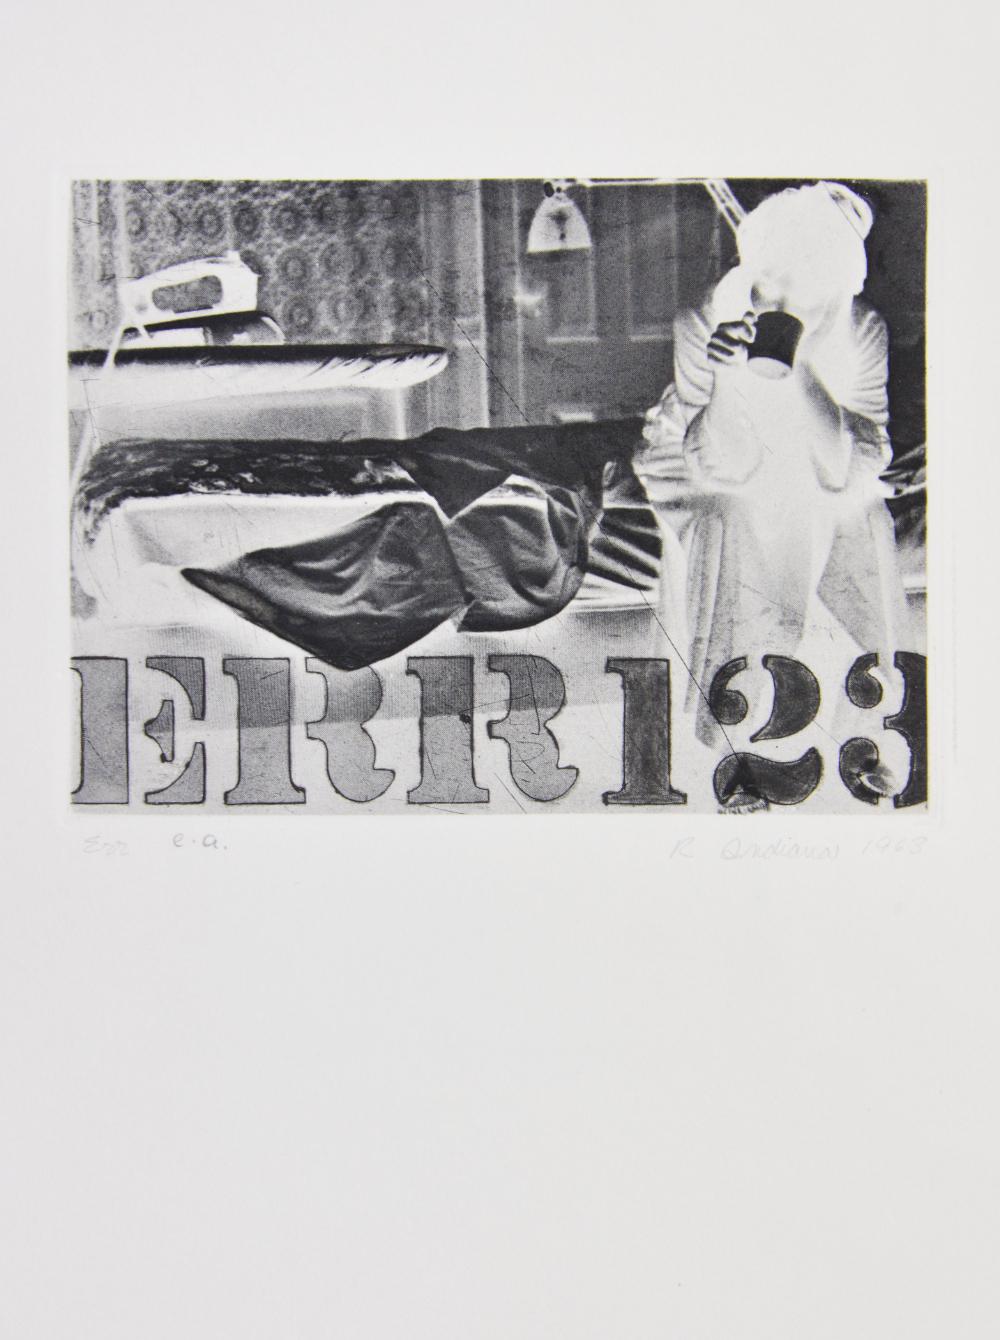 Robert indiana  Figurative Print - Err, from The International Anthology of Contemporary Engraving